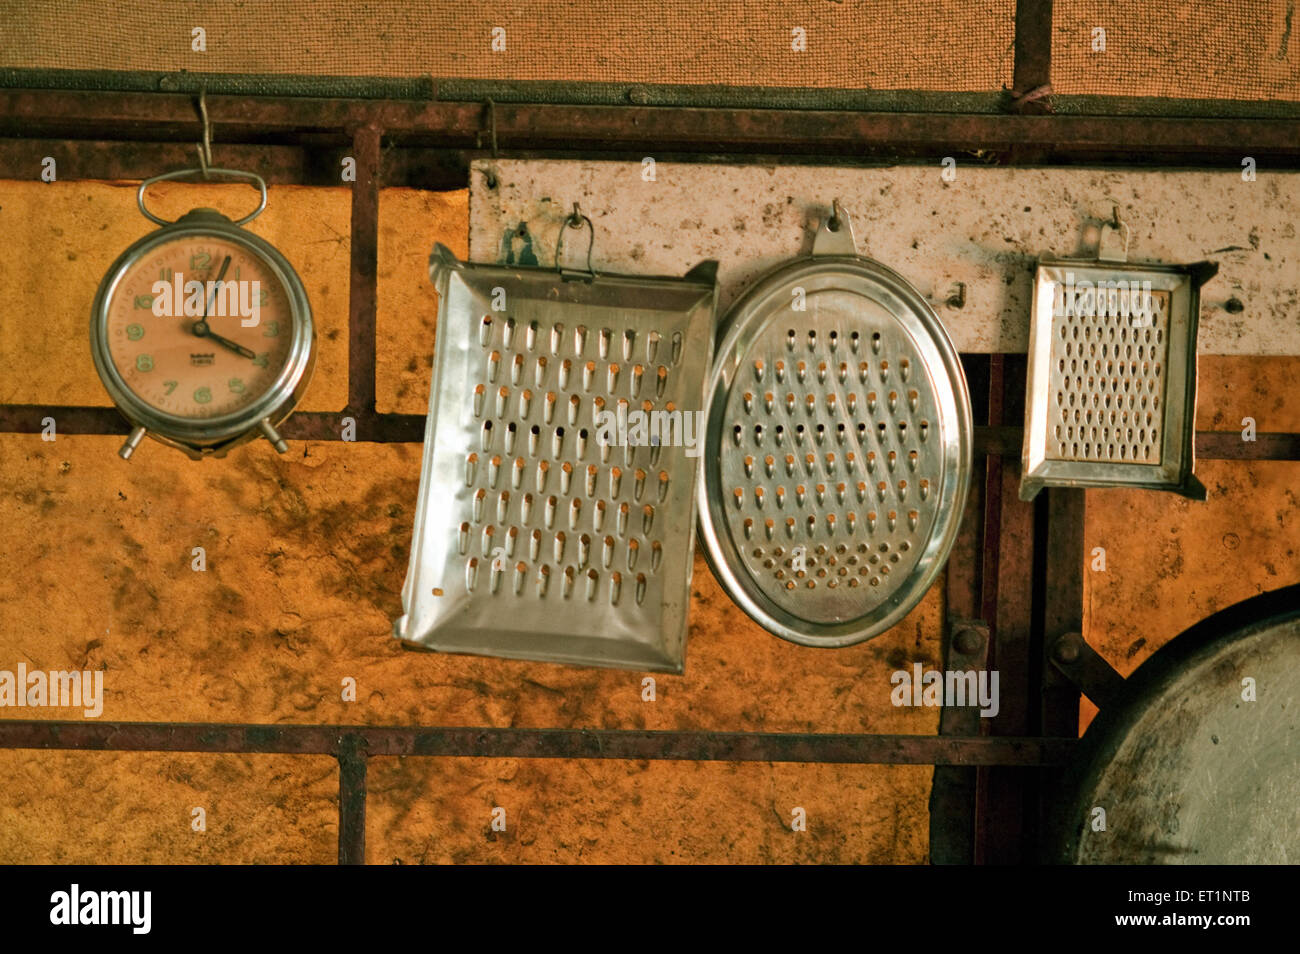 Grater and pans in kitchen Stock Photo